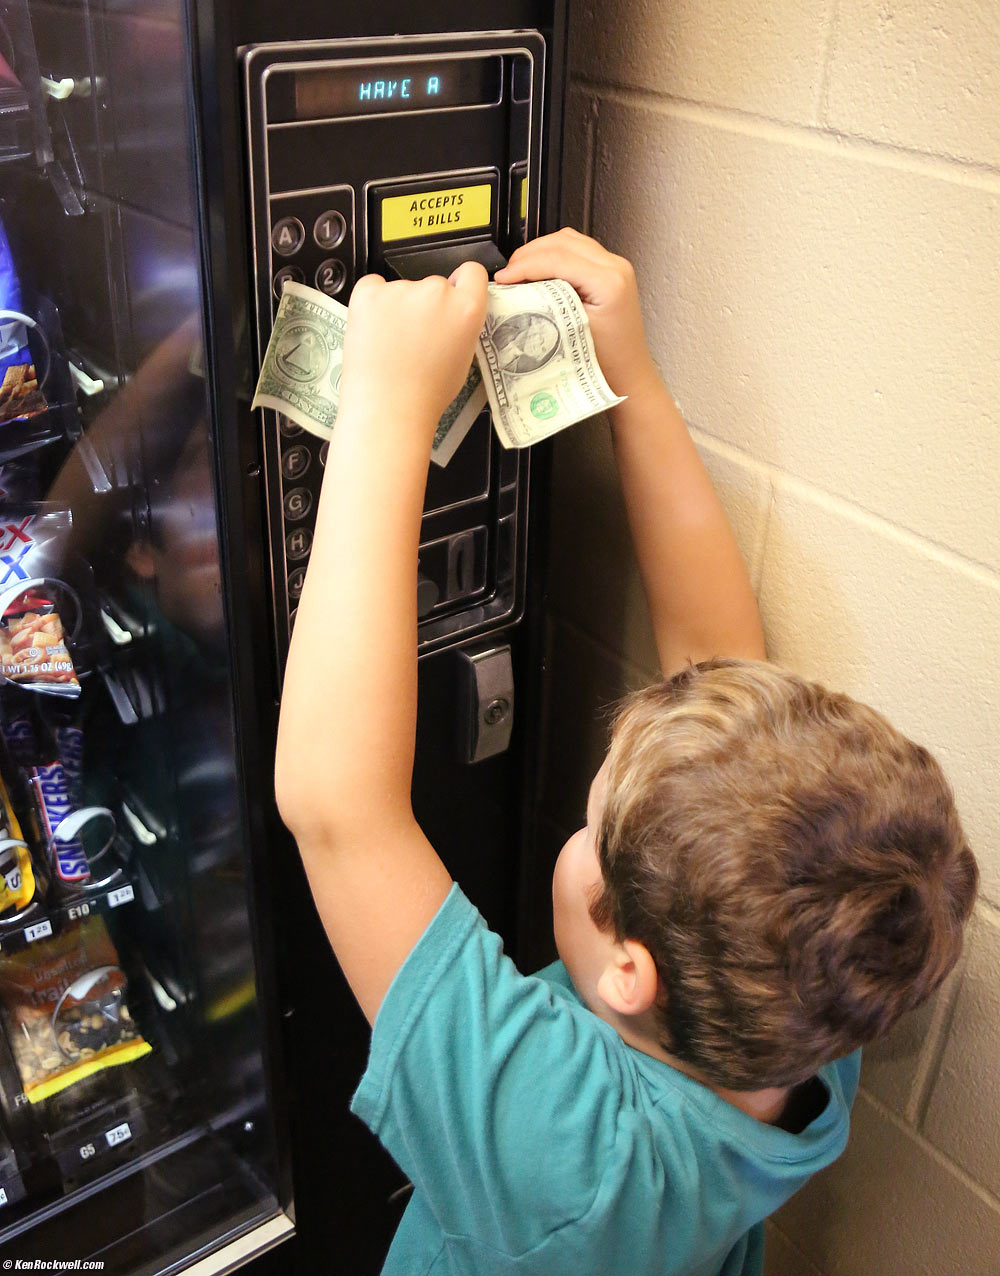 Ryan scores two dollars from Dada and wants some Chex Mix from the snack machine